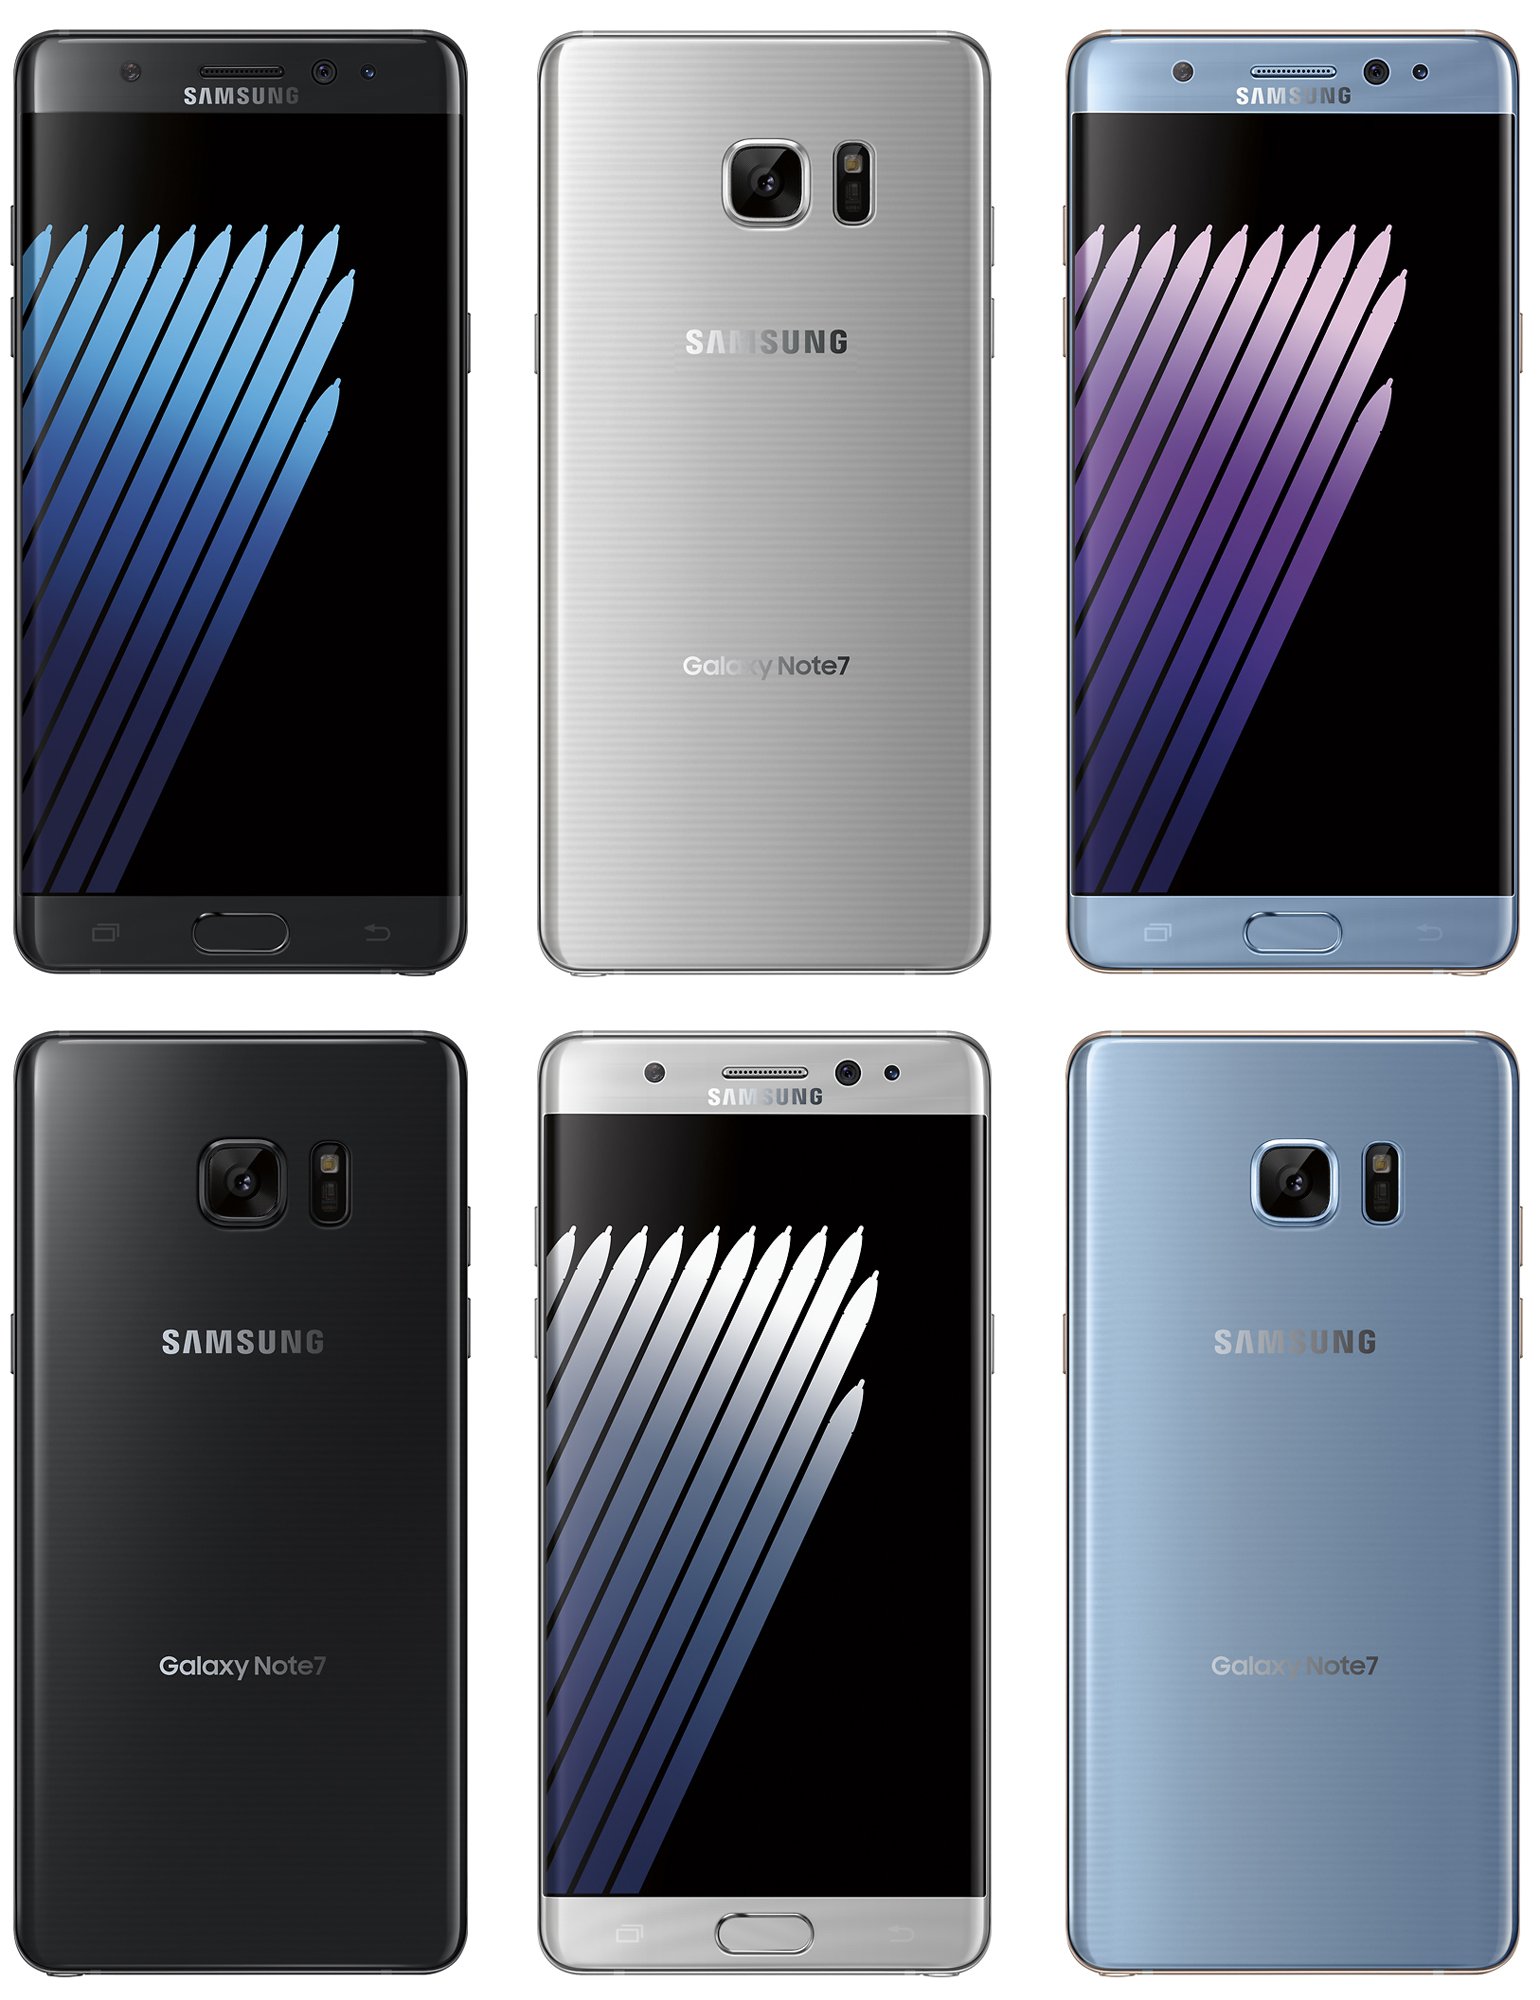 Samsung Galaxy Note 7 leaked